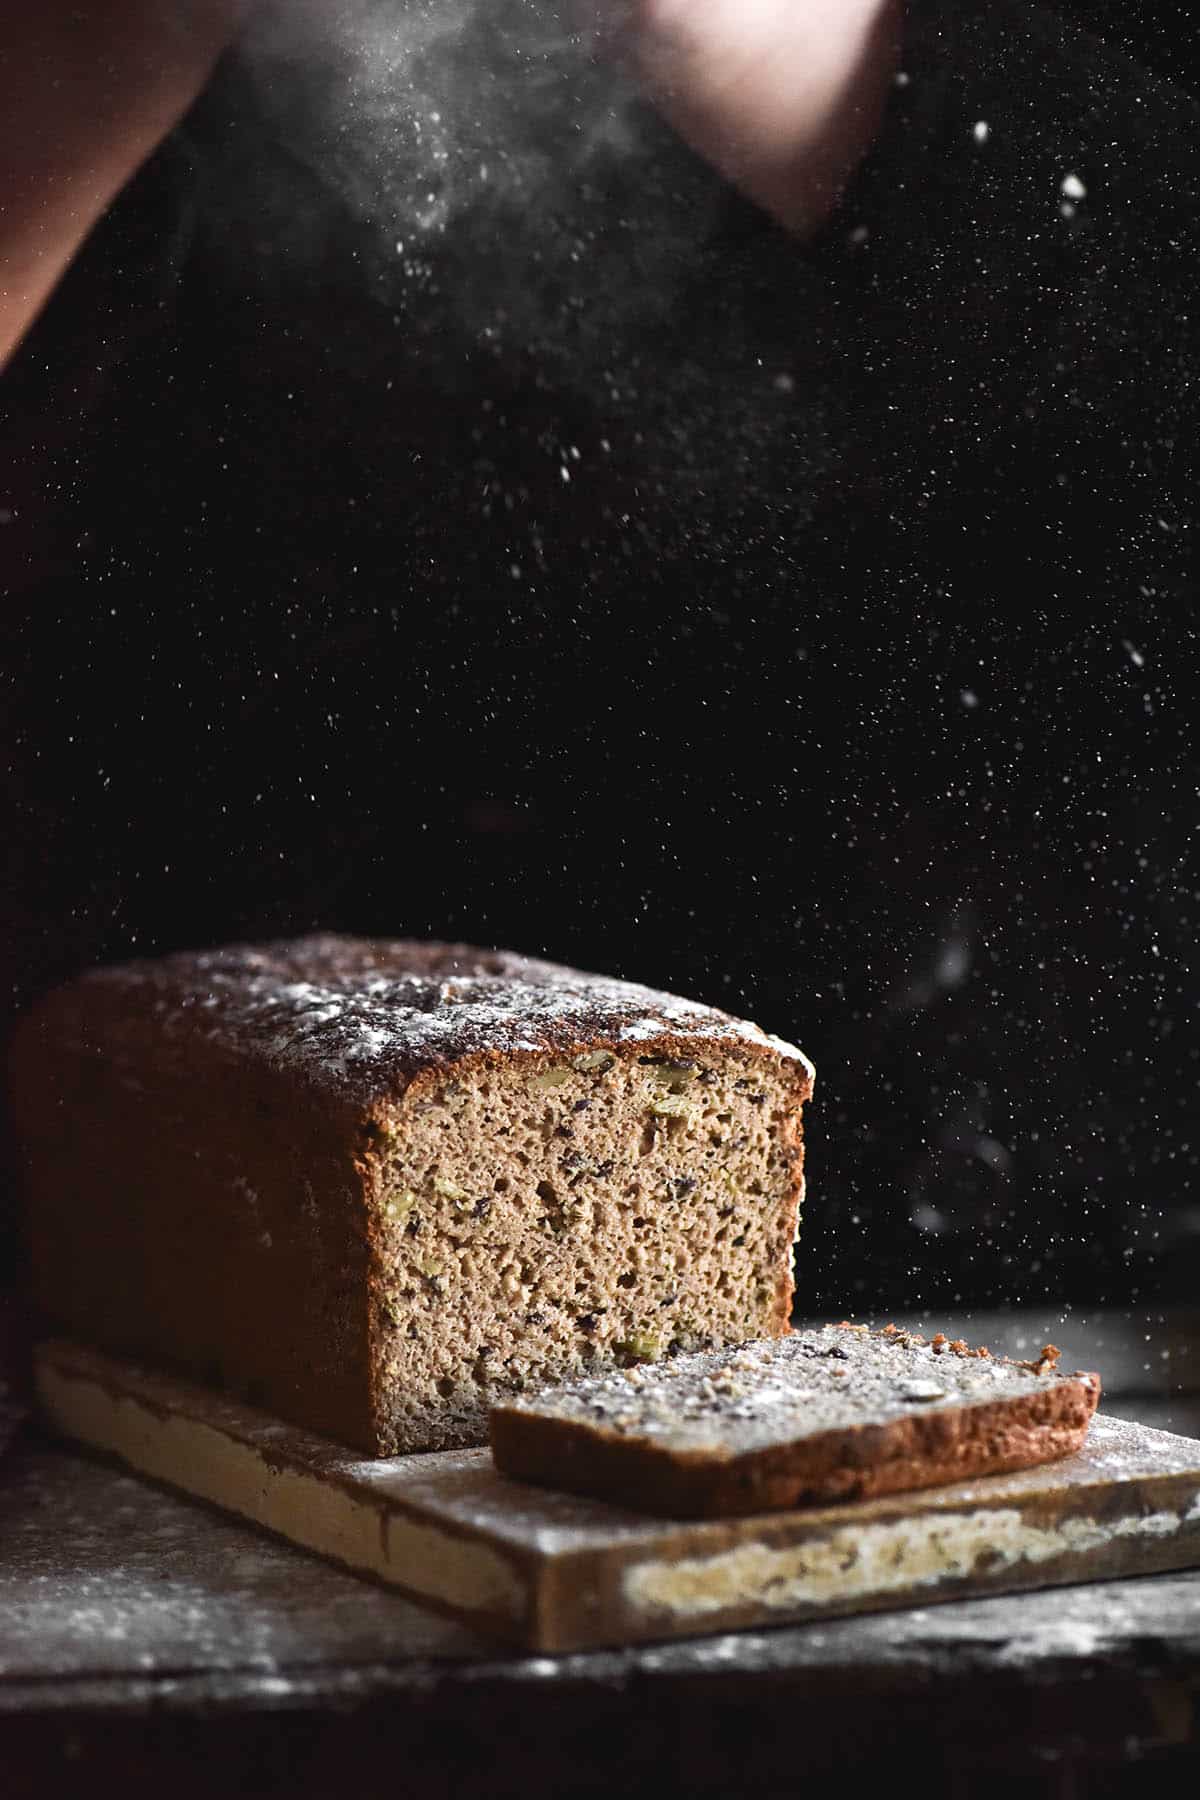 A dark and moody image of a loaf of gluten free seeded bread against a dark backdrop.